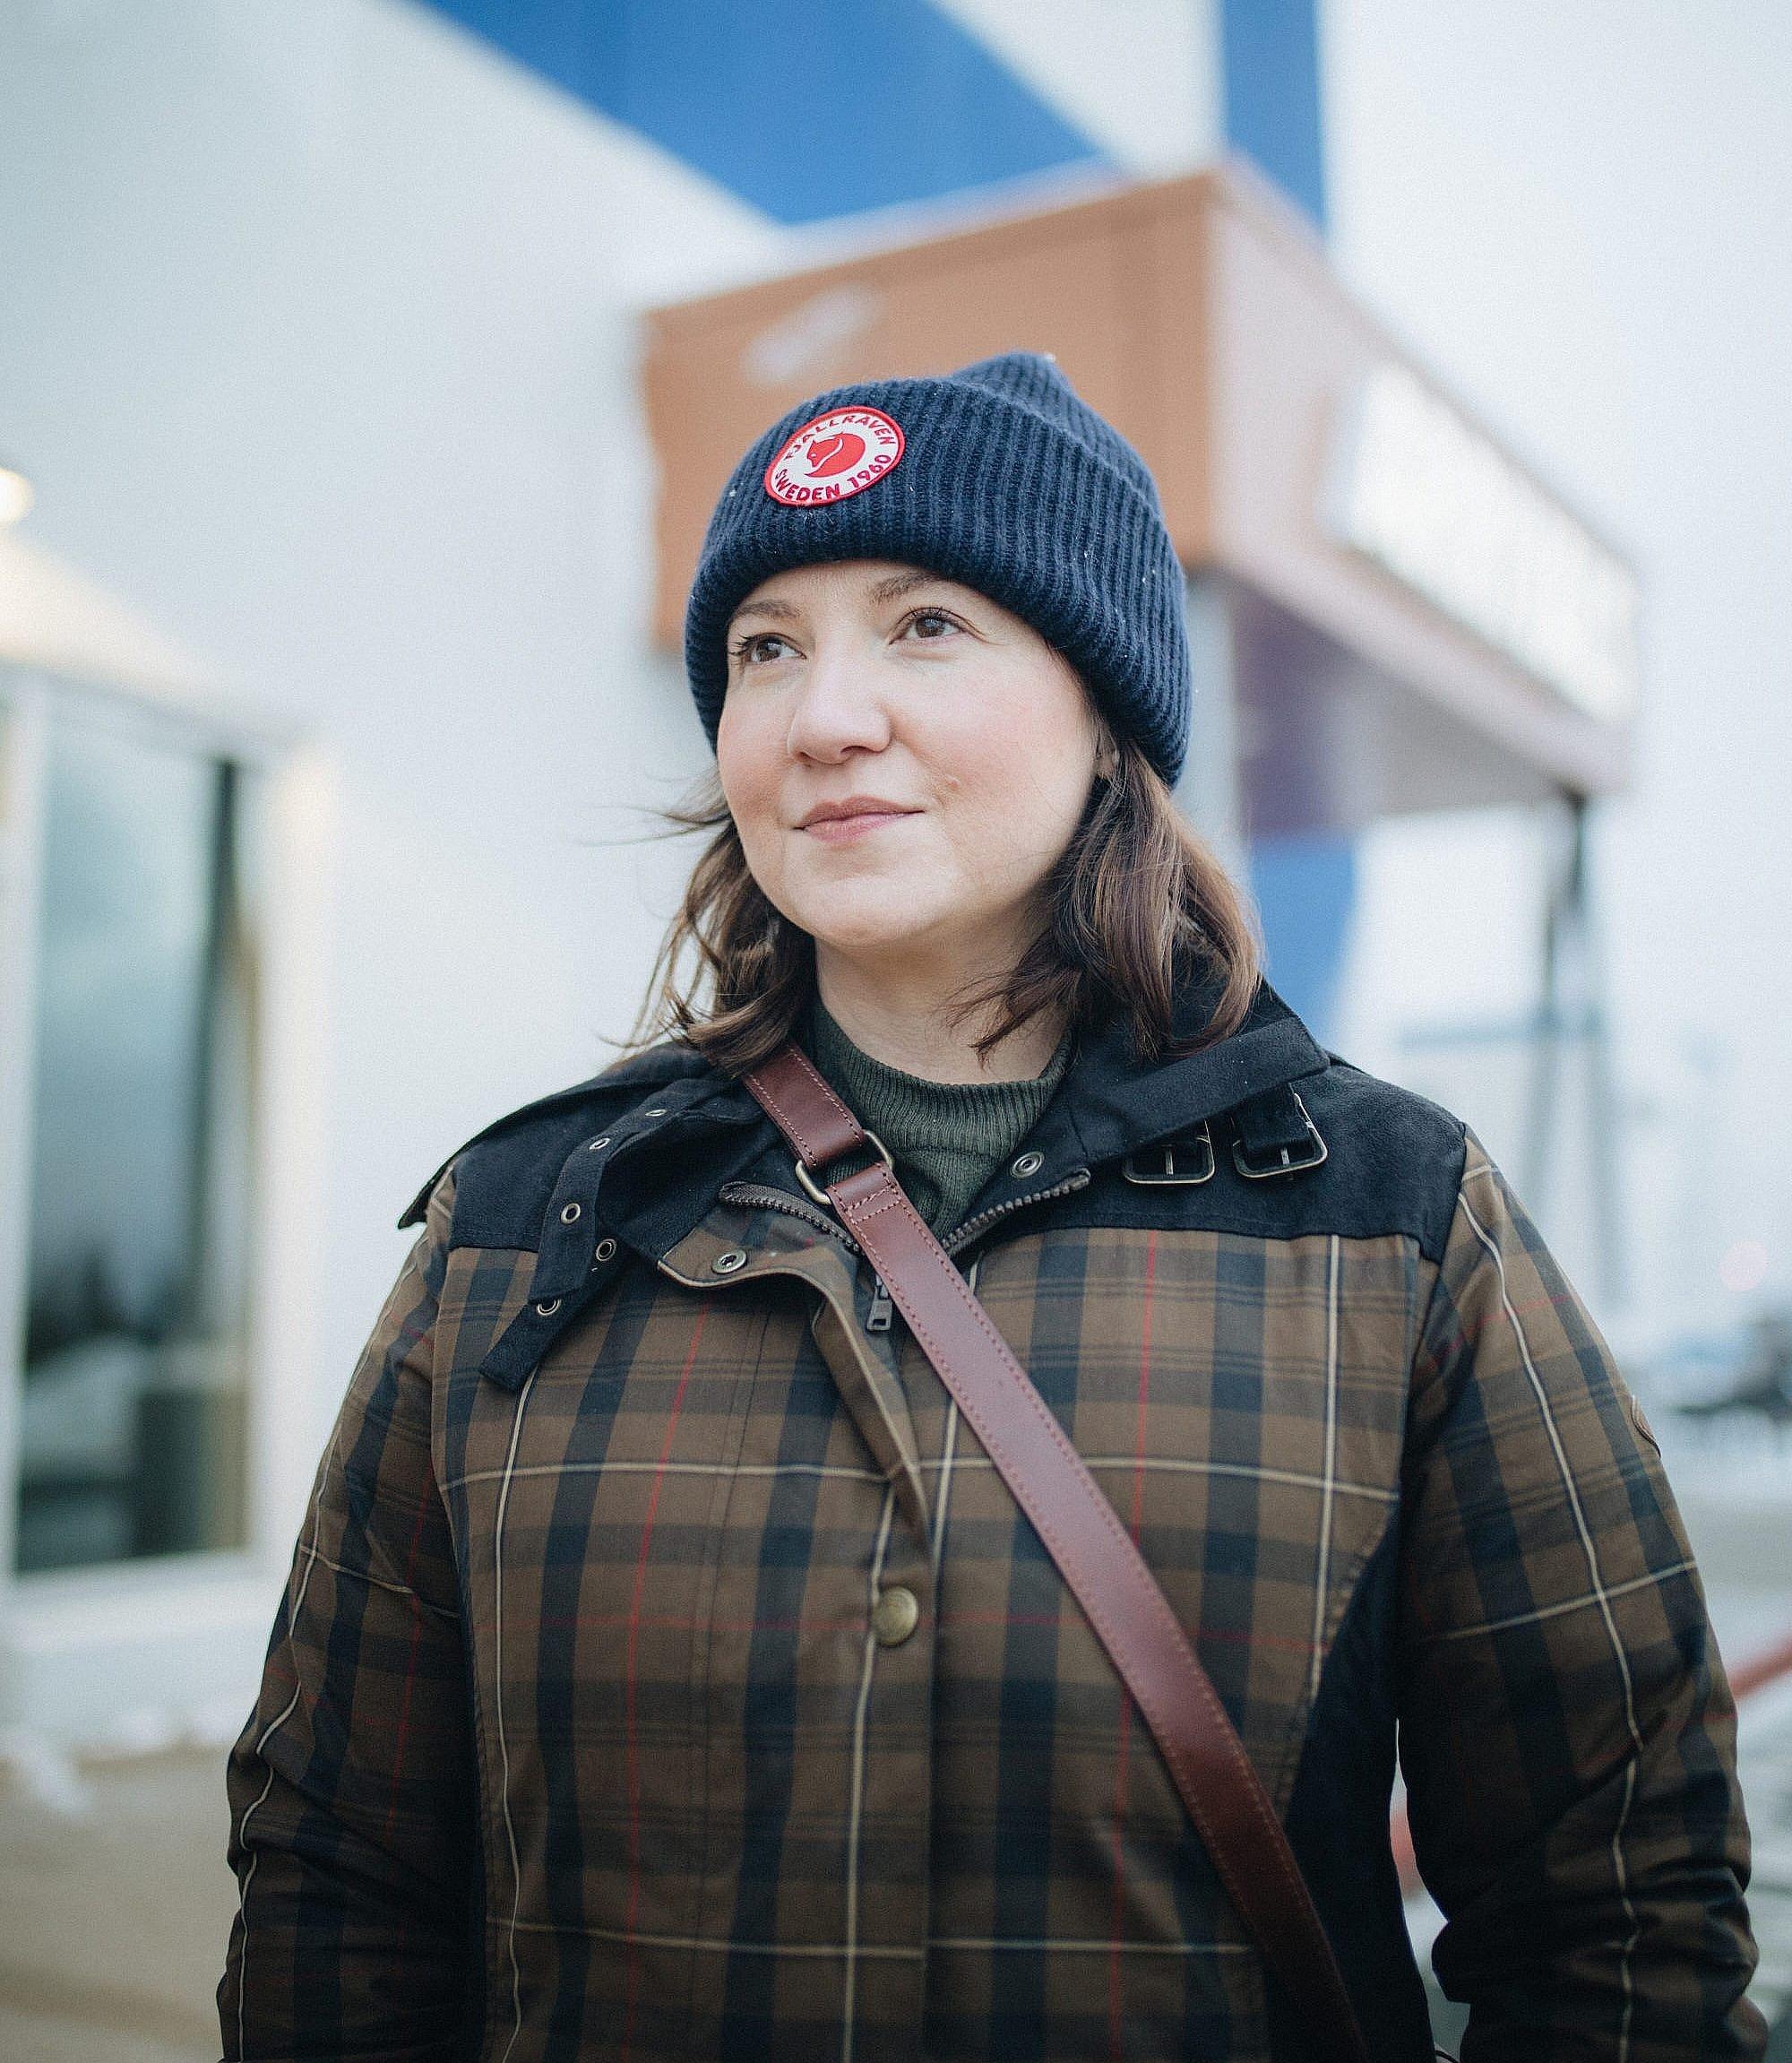 Amanda Young is a cook on the Terra Nova offshore platform. For her, Bay du Nord represents a future for an industry thatâs given her economic independence